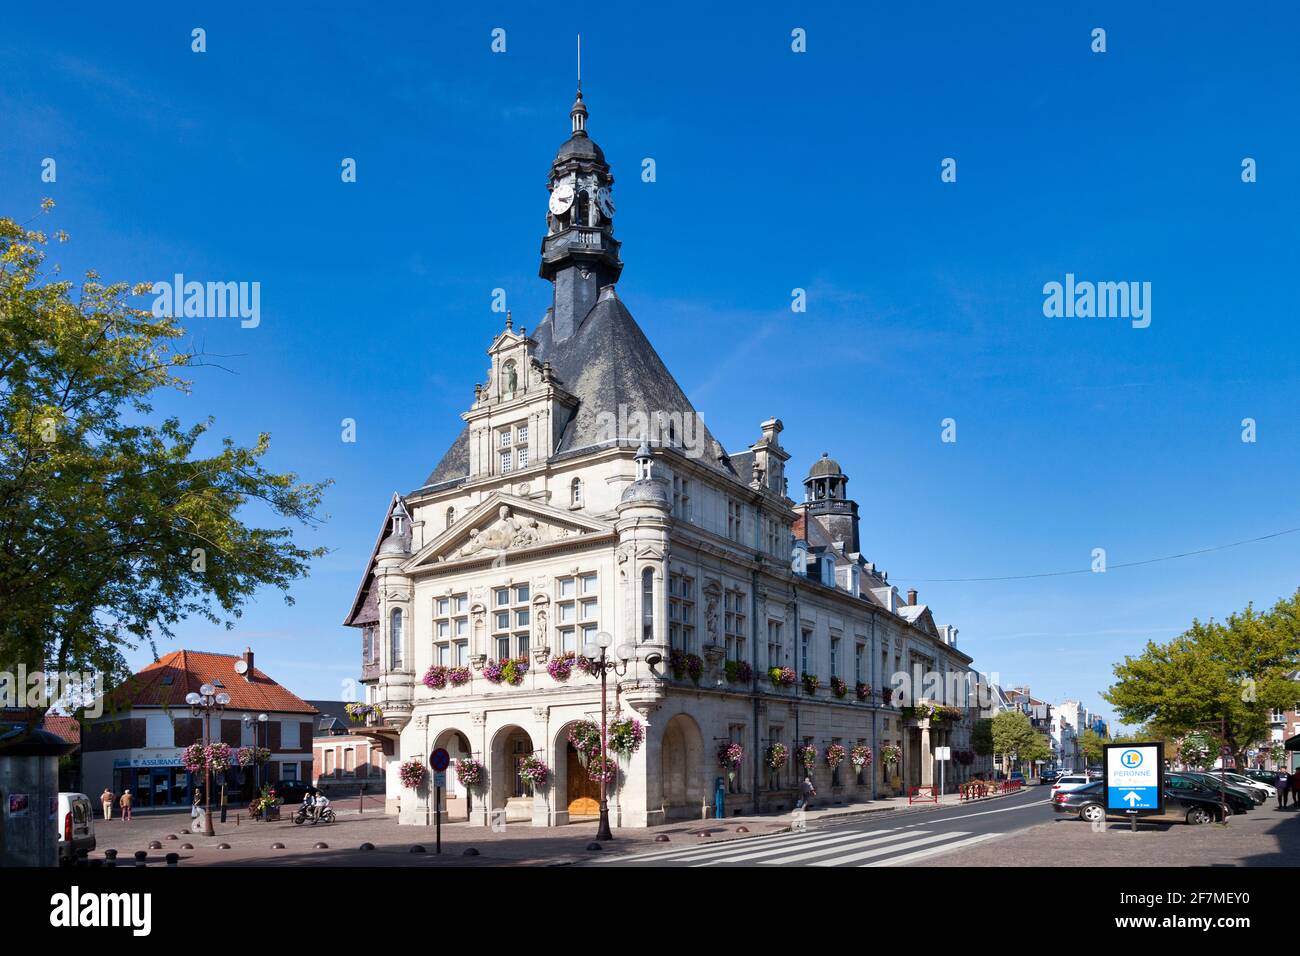 Péronne, France - September 12 2020: The Peronne Town Hall is a 16th and 18th century building located in the city center of Peronne. Stock Photo